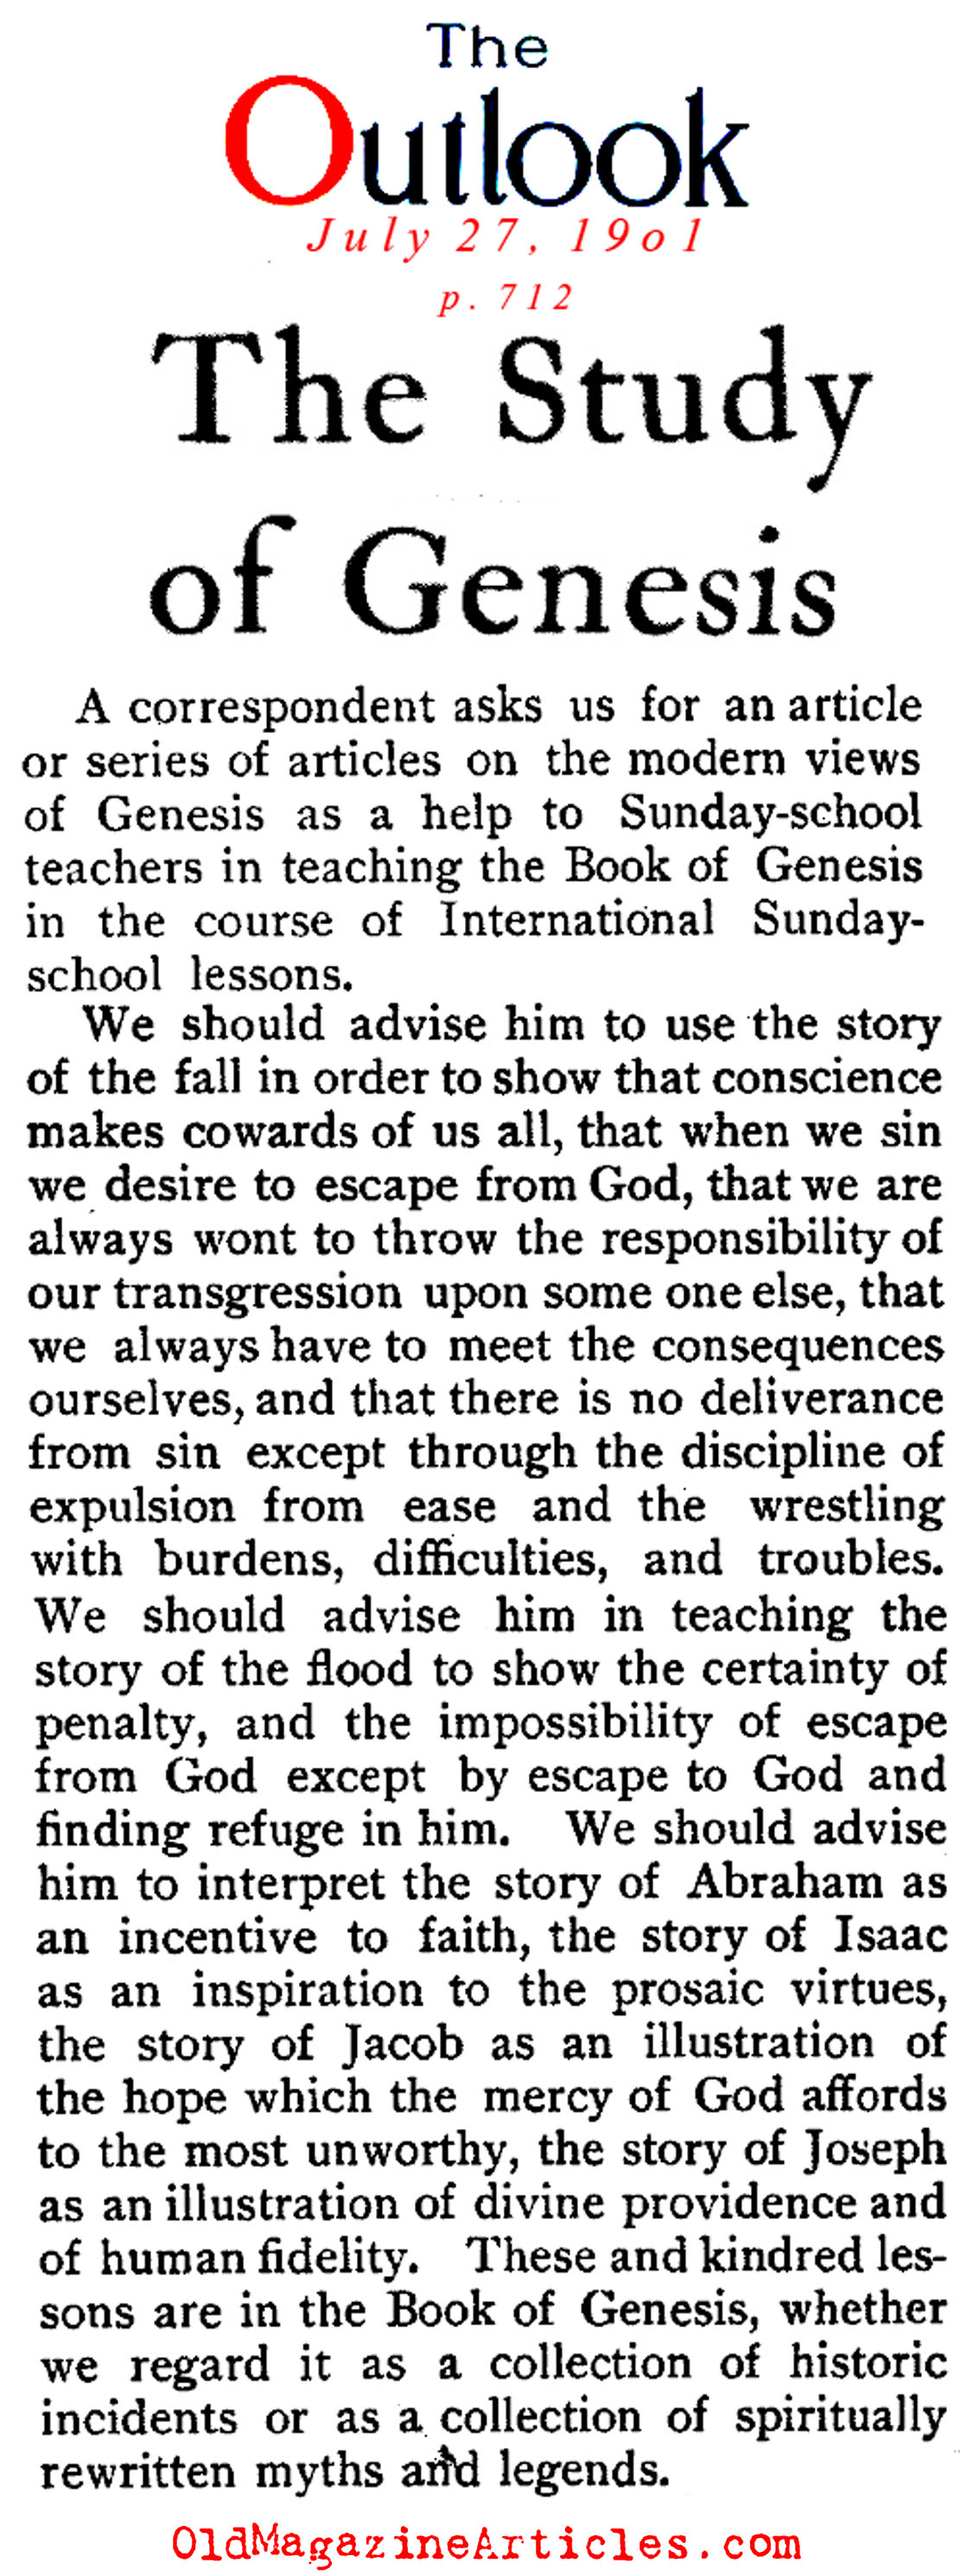 The Study of the Book of Genesis (The Outlook, 1901)